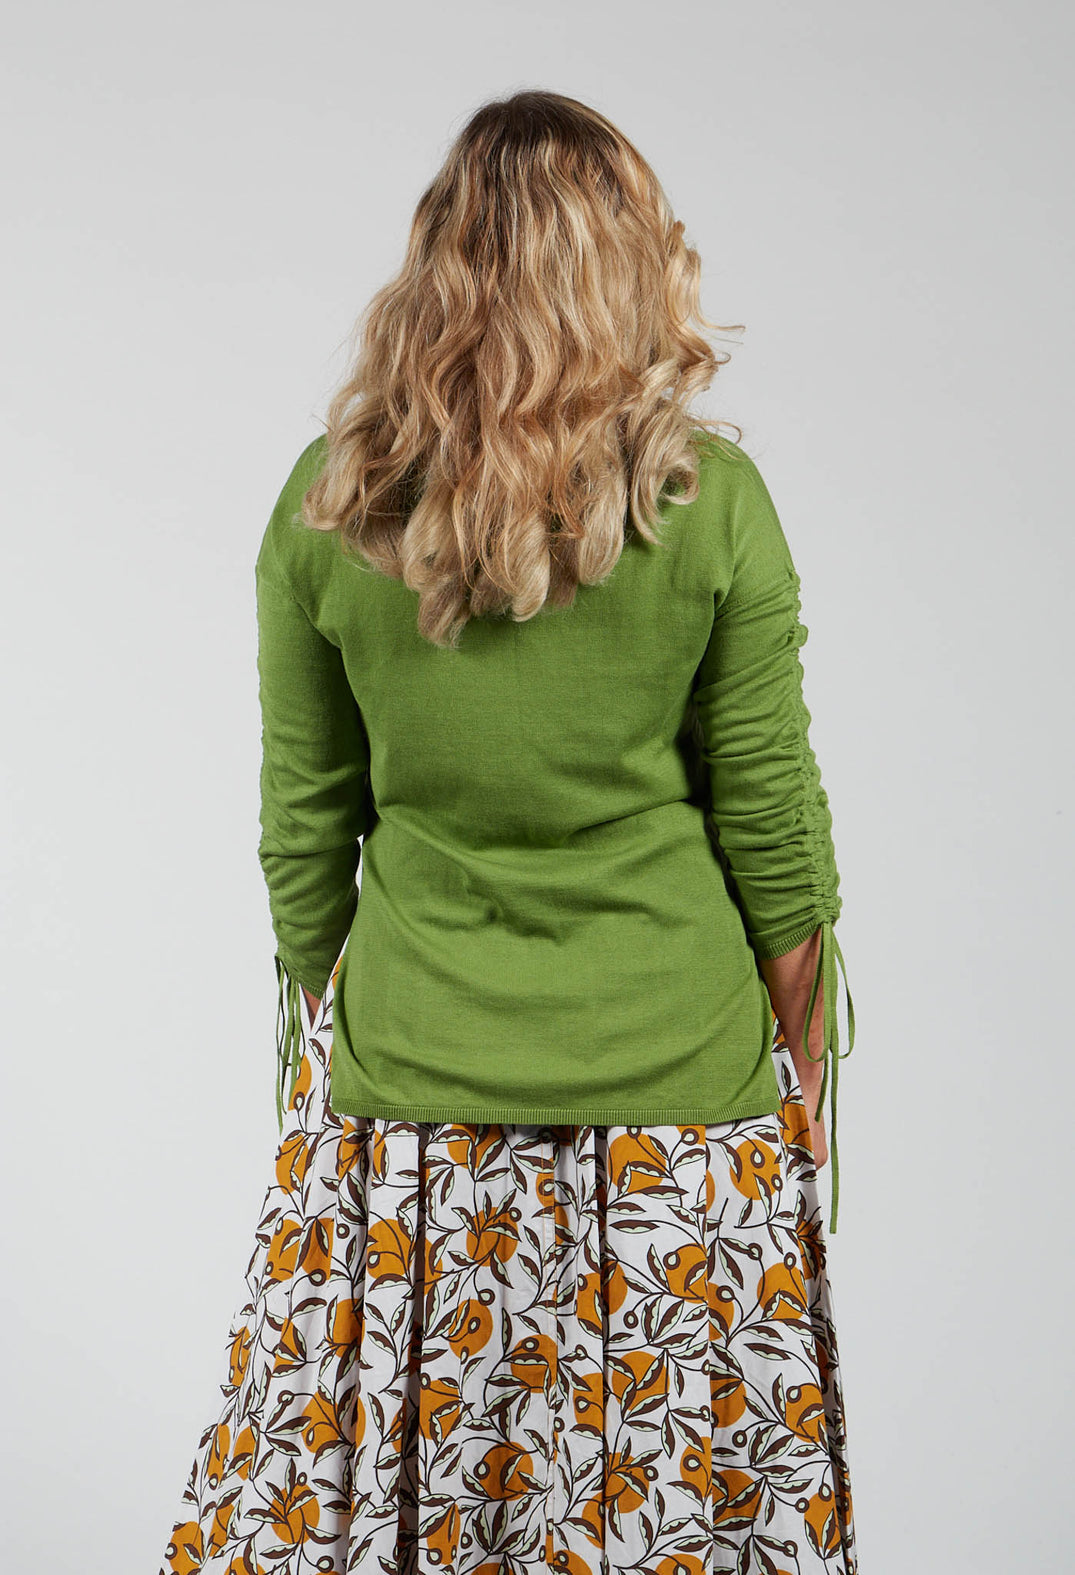 Fine Knit Top with Tie Sleeves in Verde Muschio